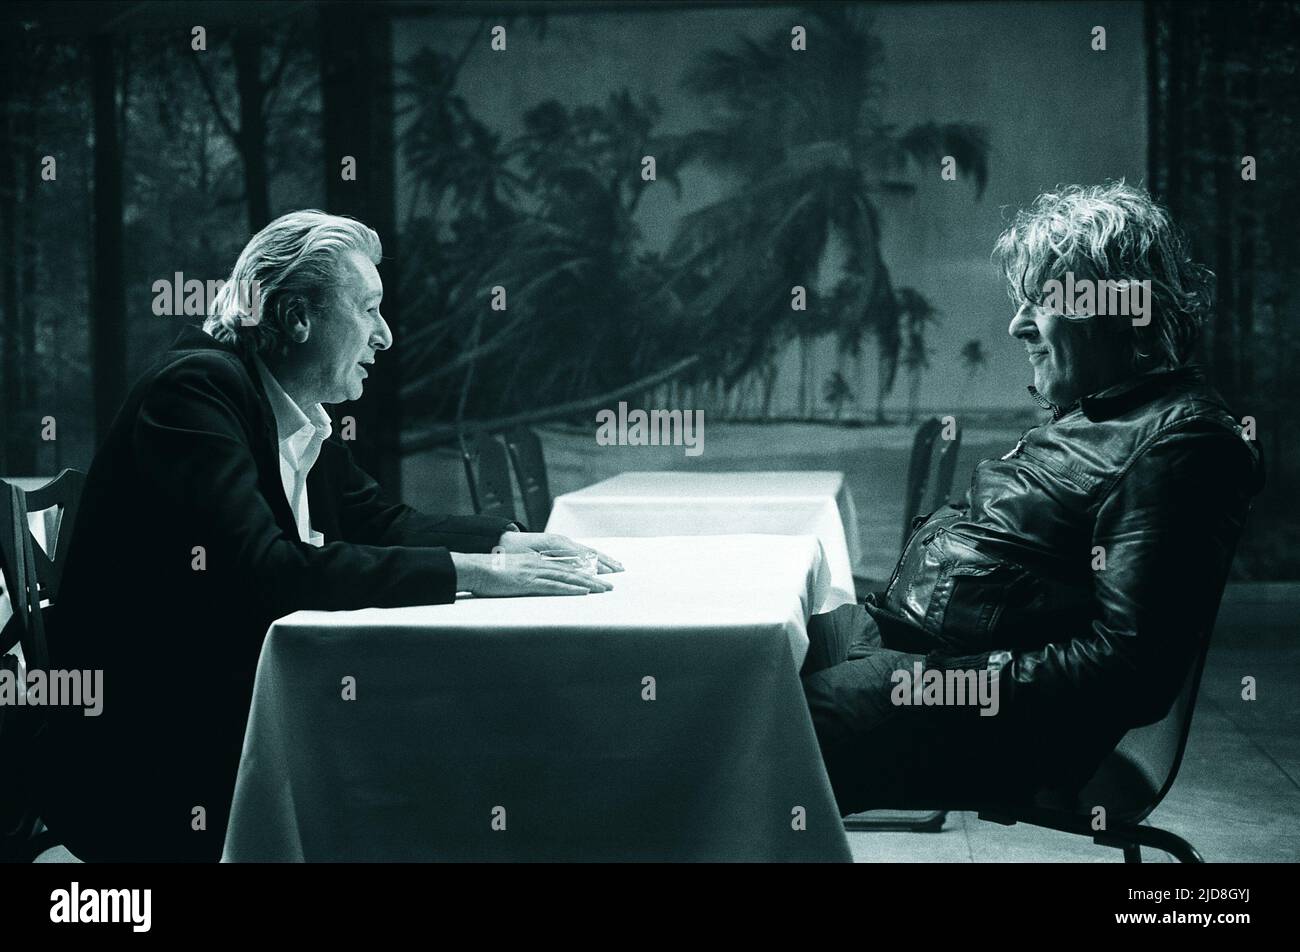 BASHUNG,ARNO, I ALWAYS WANTED TO BE A GANGSTER, 2007, Stock Photo